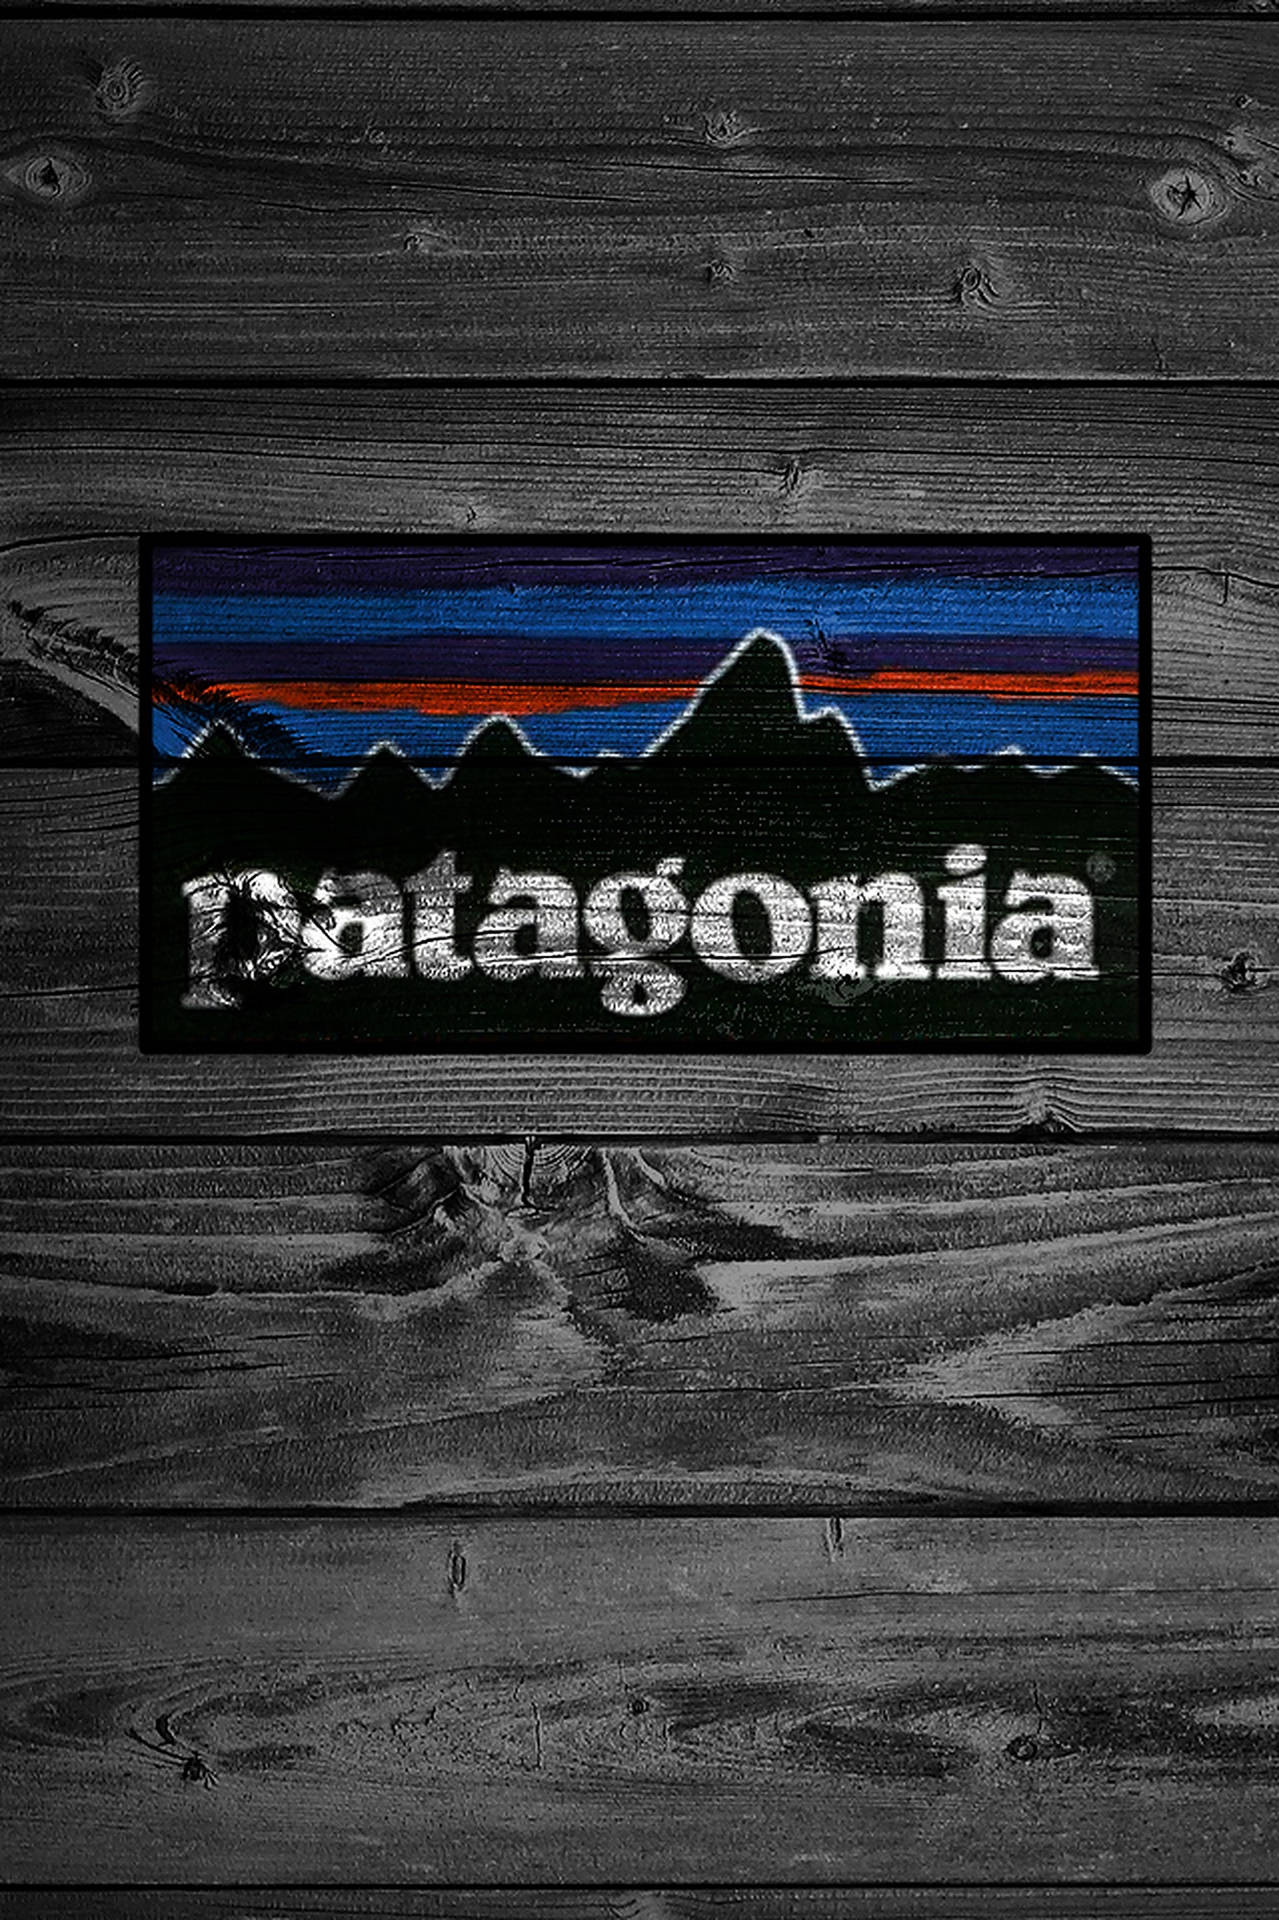 Patagonia launches a platform for environmental activism